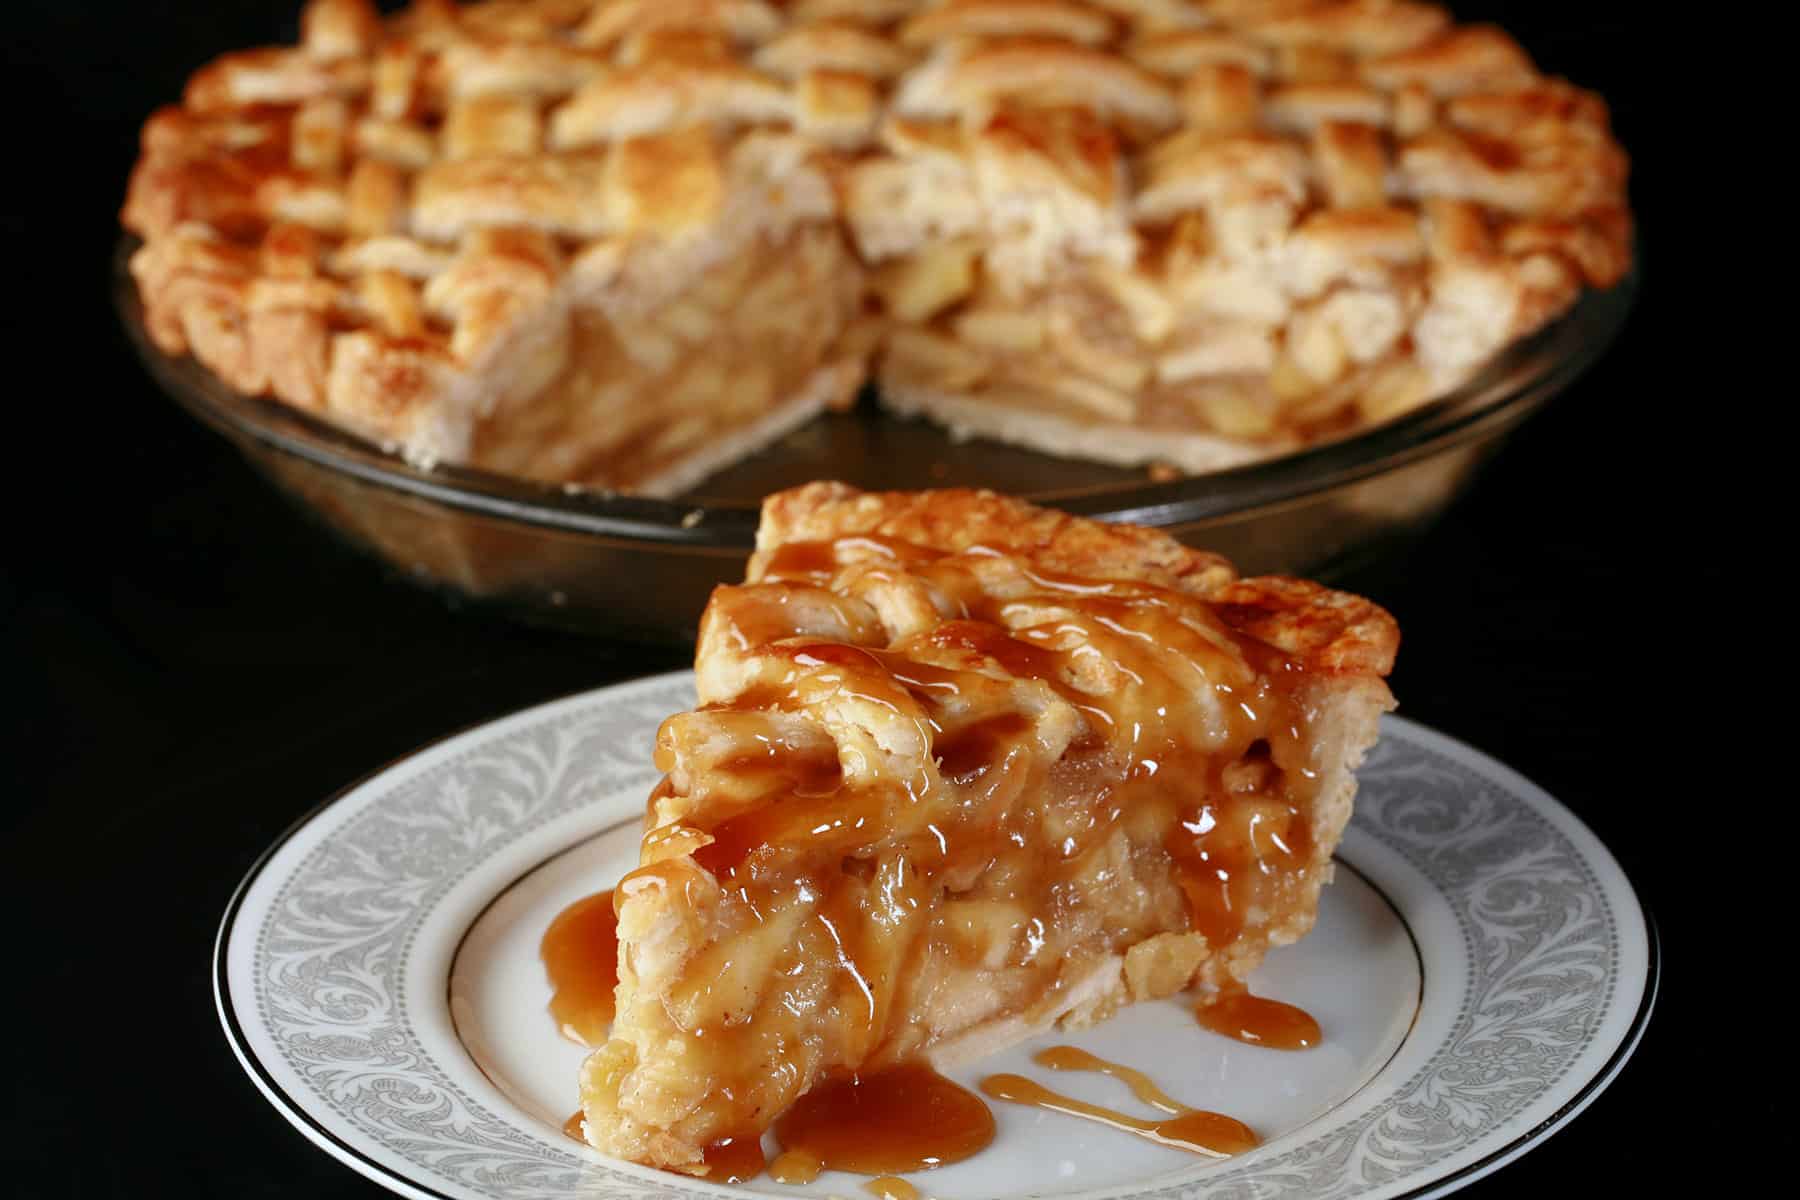 A slice of maple caramel apple pie on a plate in front of the rest of the pie.